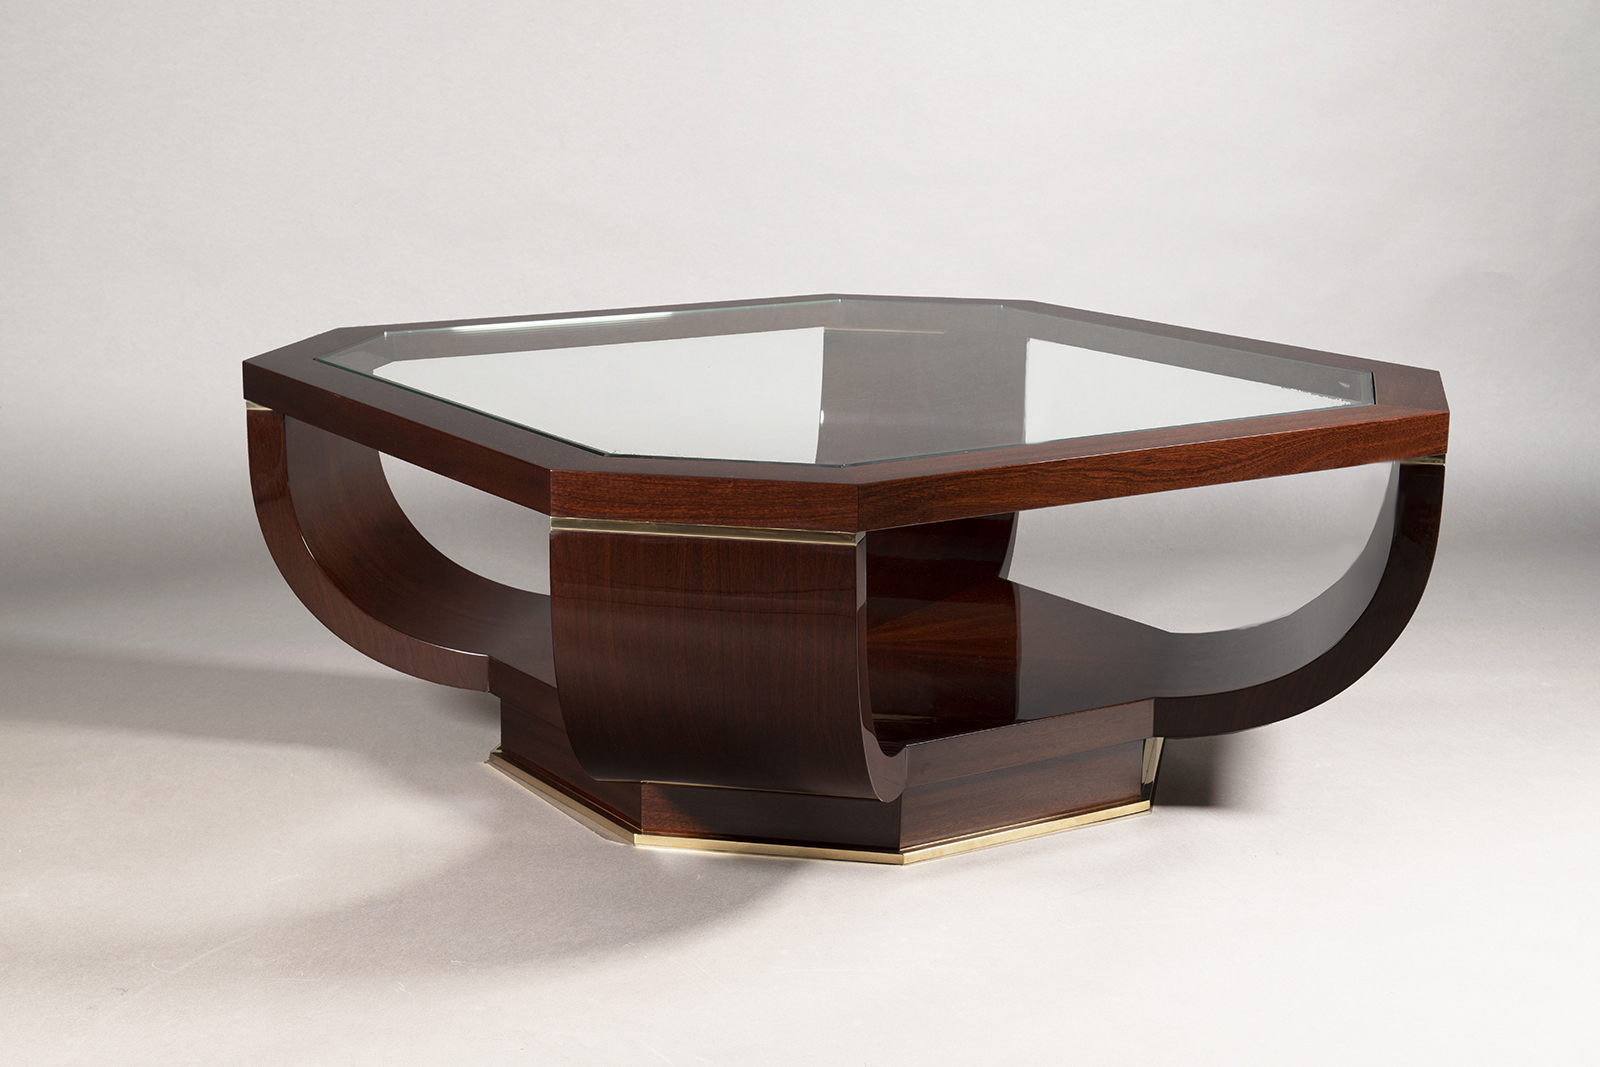 A Modernist Style Glass Top Coffee Table by ILIAD Design